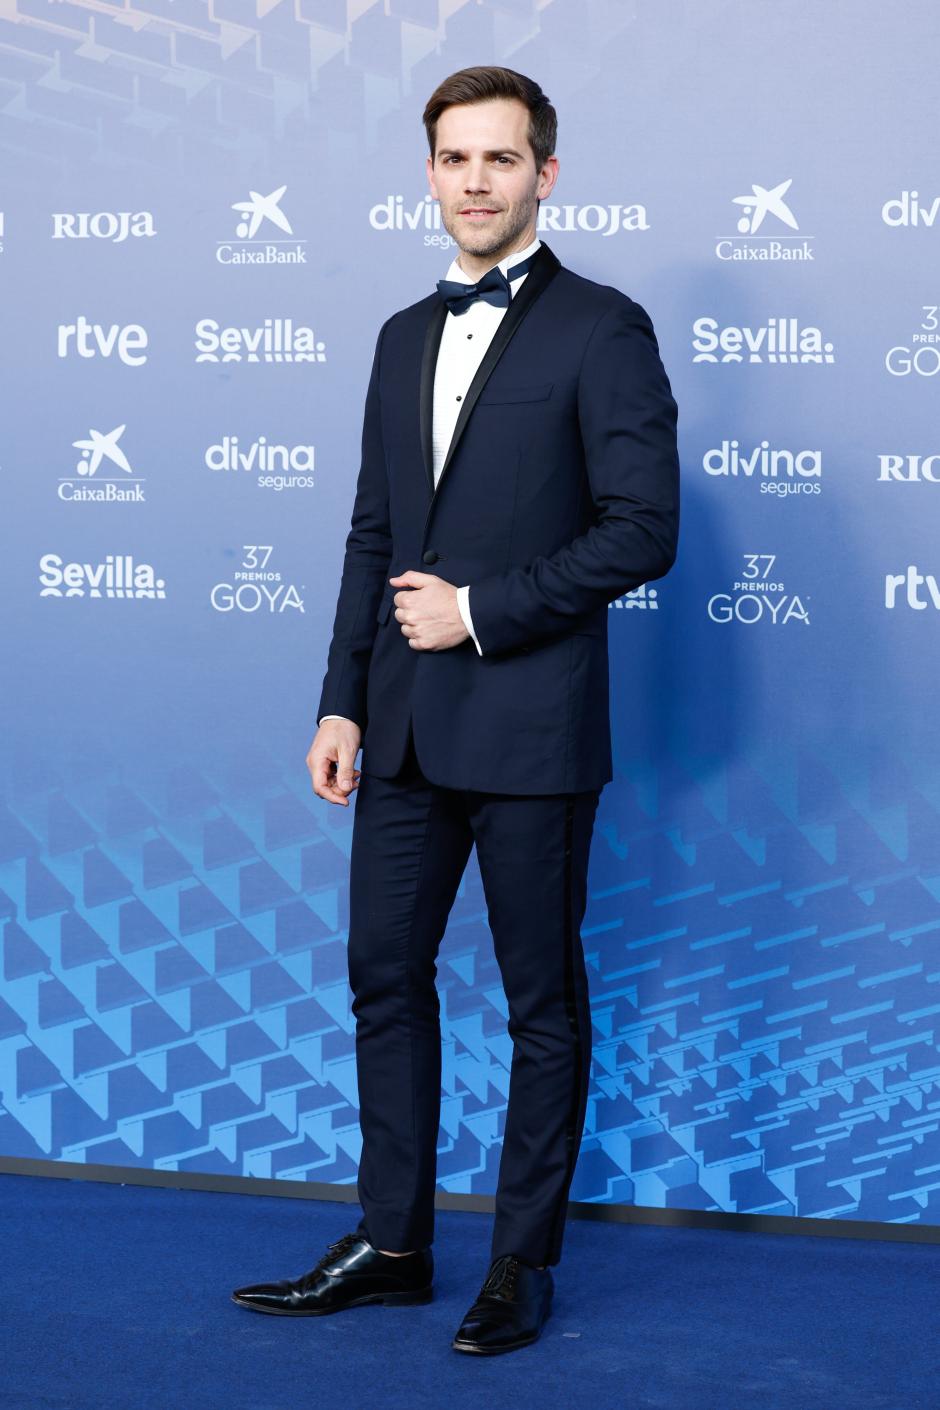 Actor Marc Clotet at photocall for the 37th annual Goya Film Awards in Sevilla on Saturday 11 February, 2023.